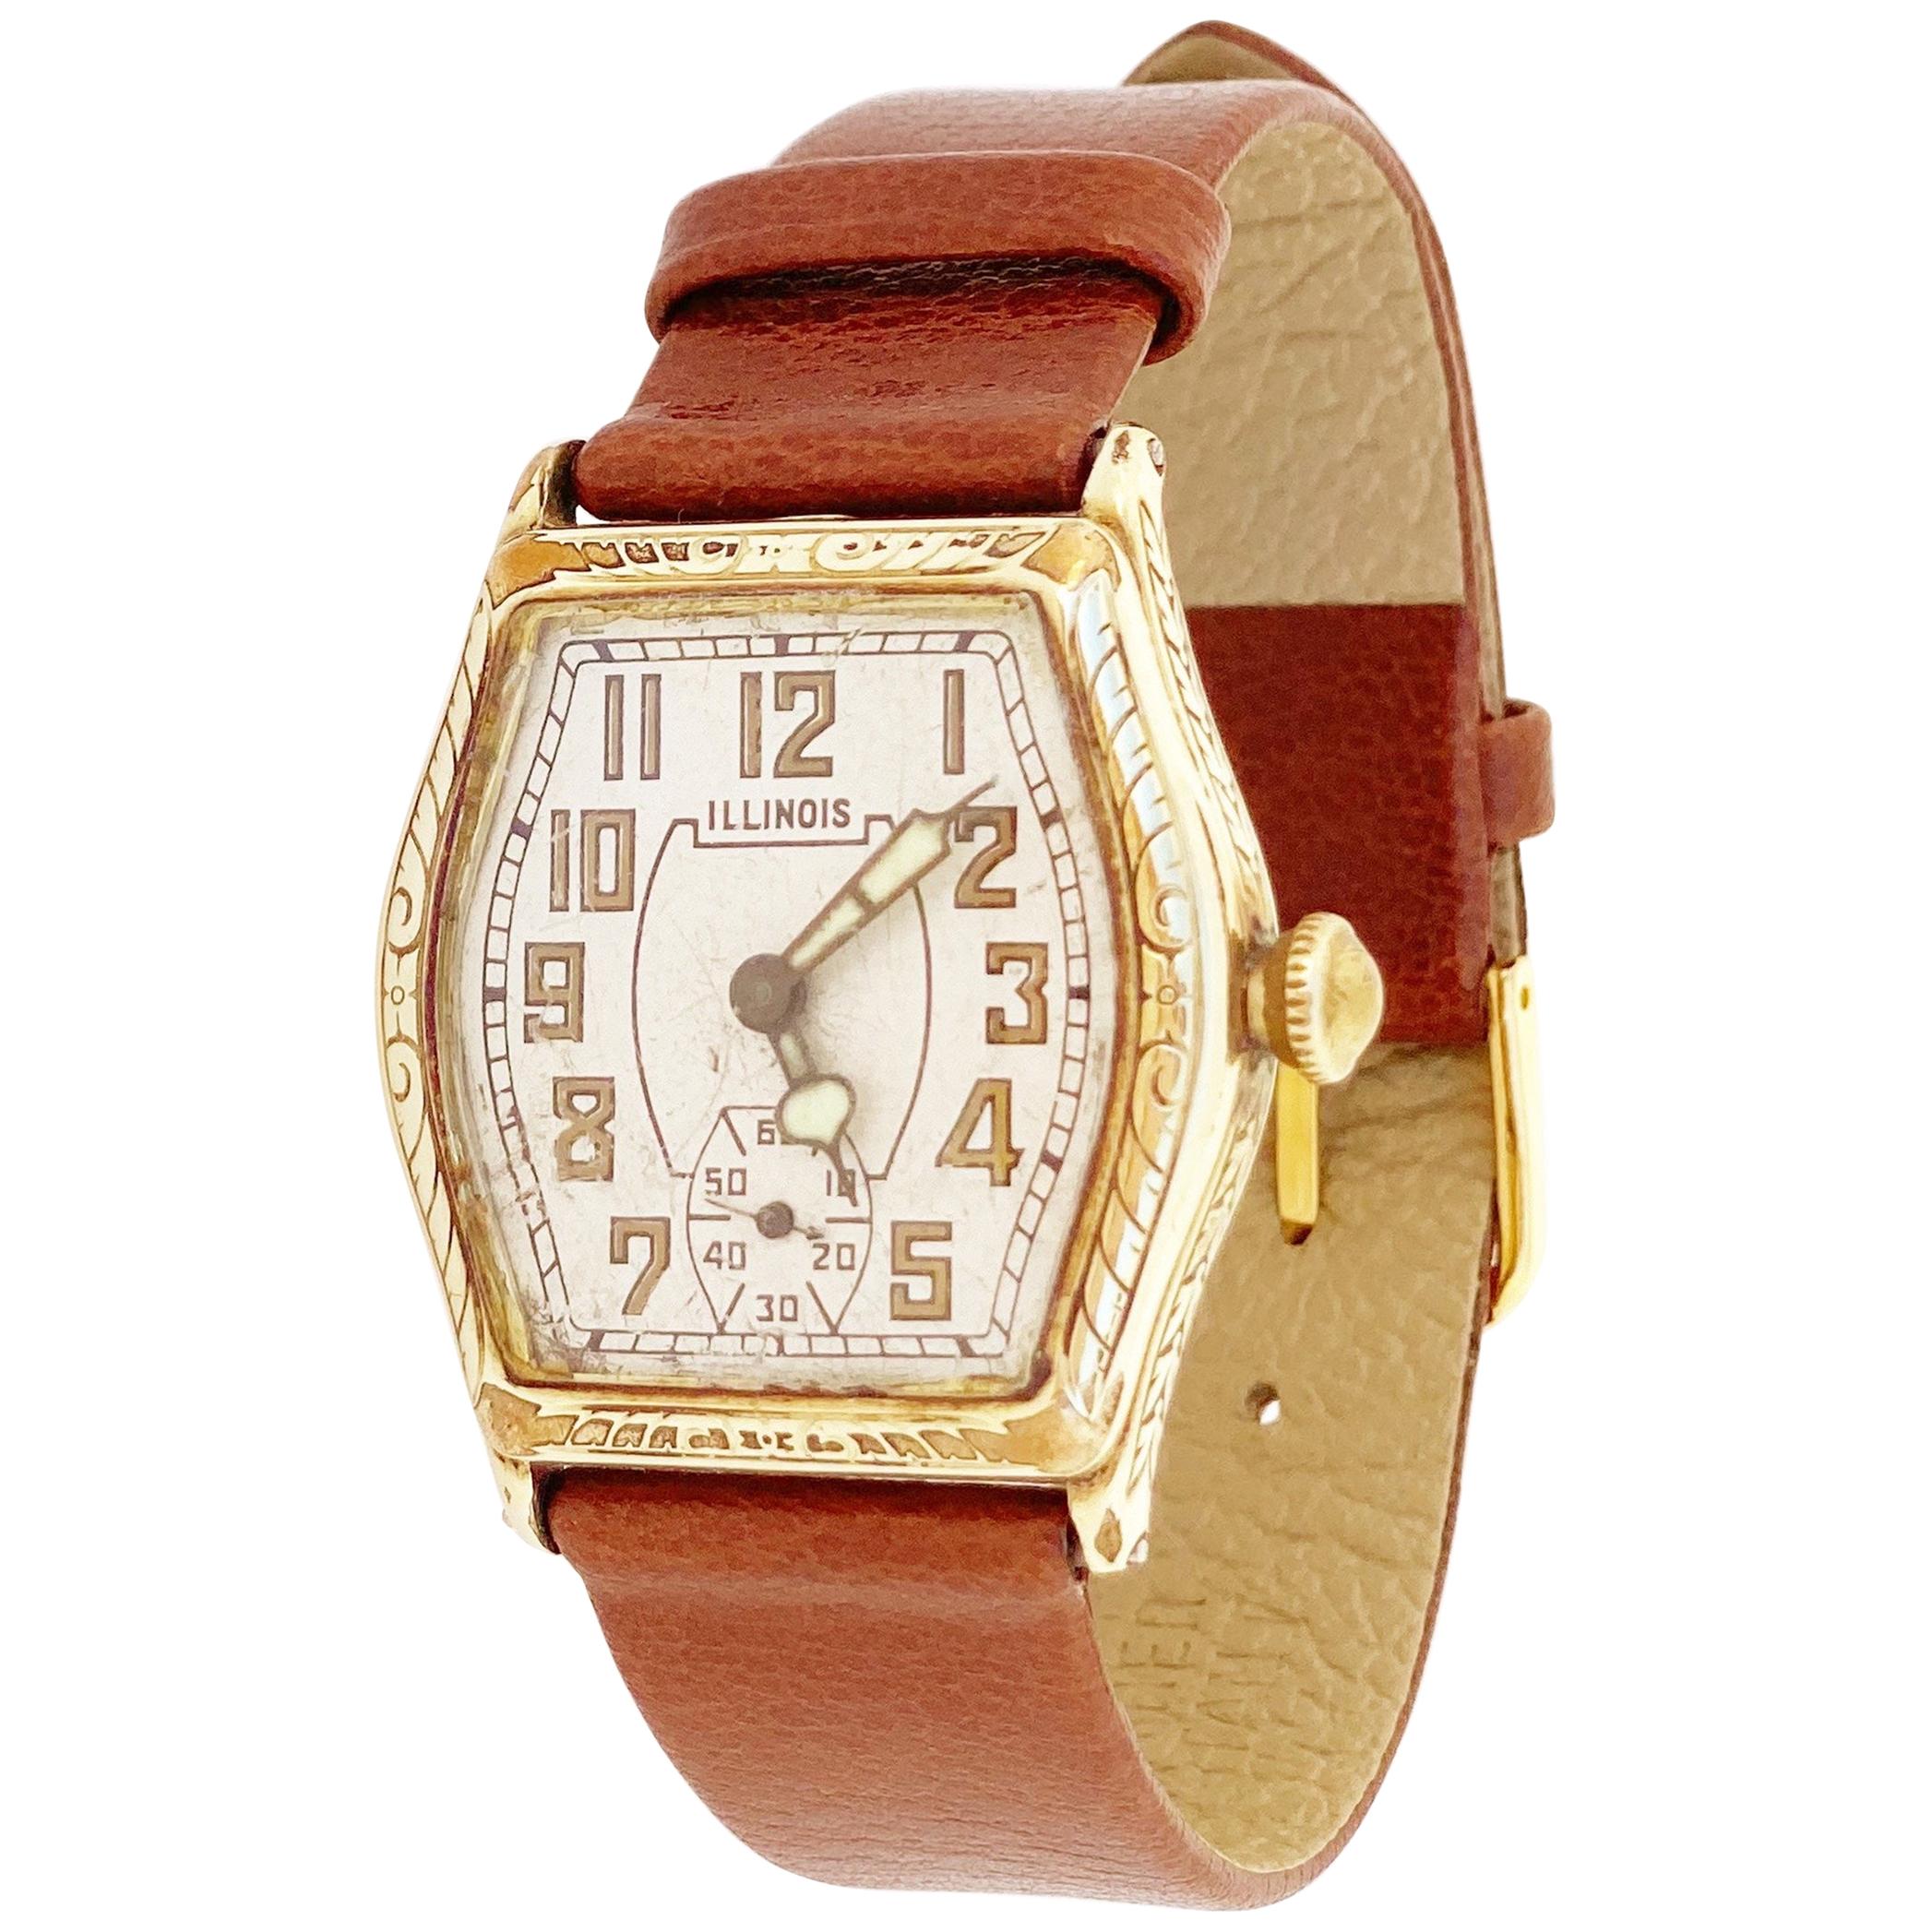 Gold Filled Art Deco Watch with Leather Strap by Illinois, 1920s